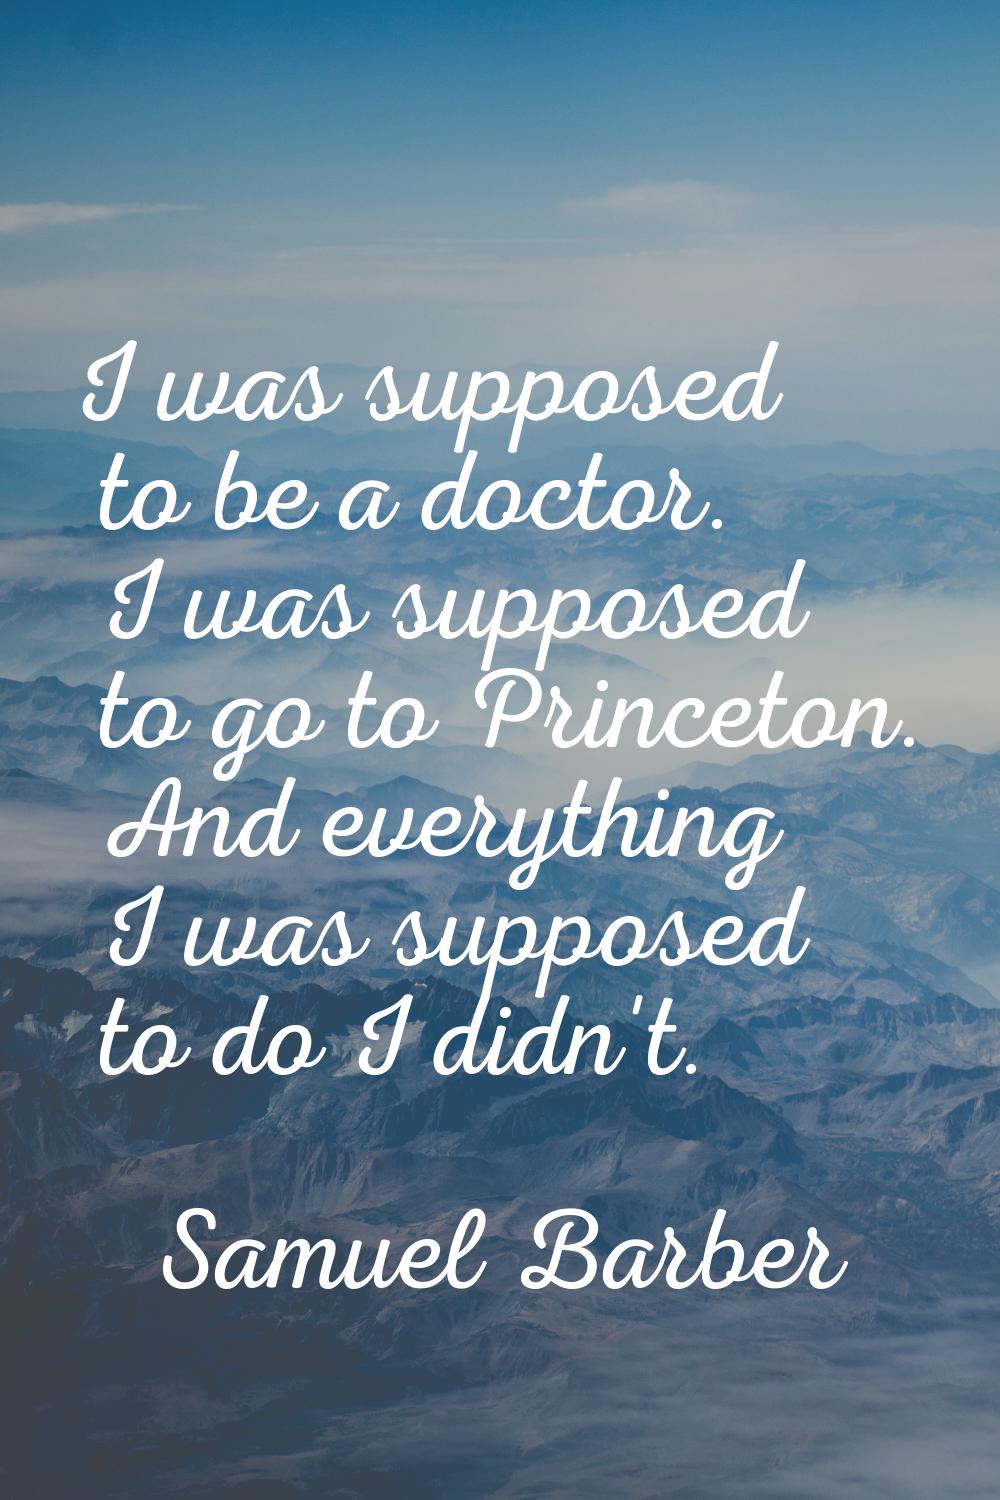 I was supposed to be a doctor. I was supposed to go to Princeton. And everything I was supposed to 